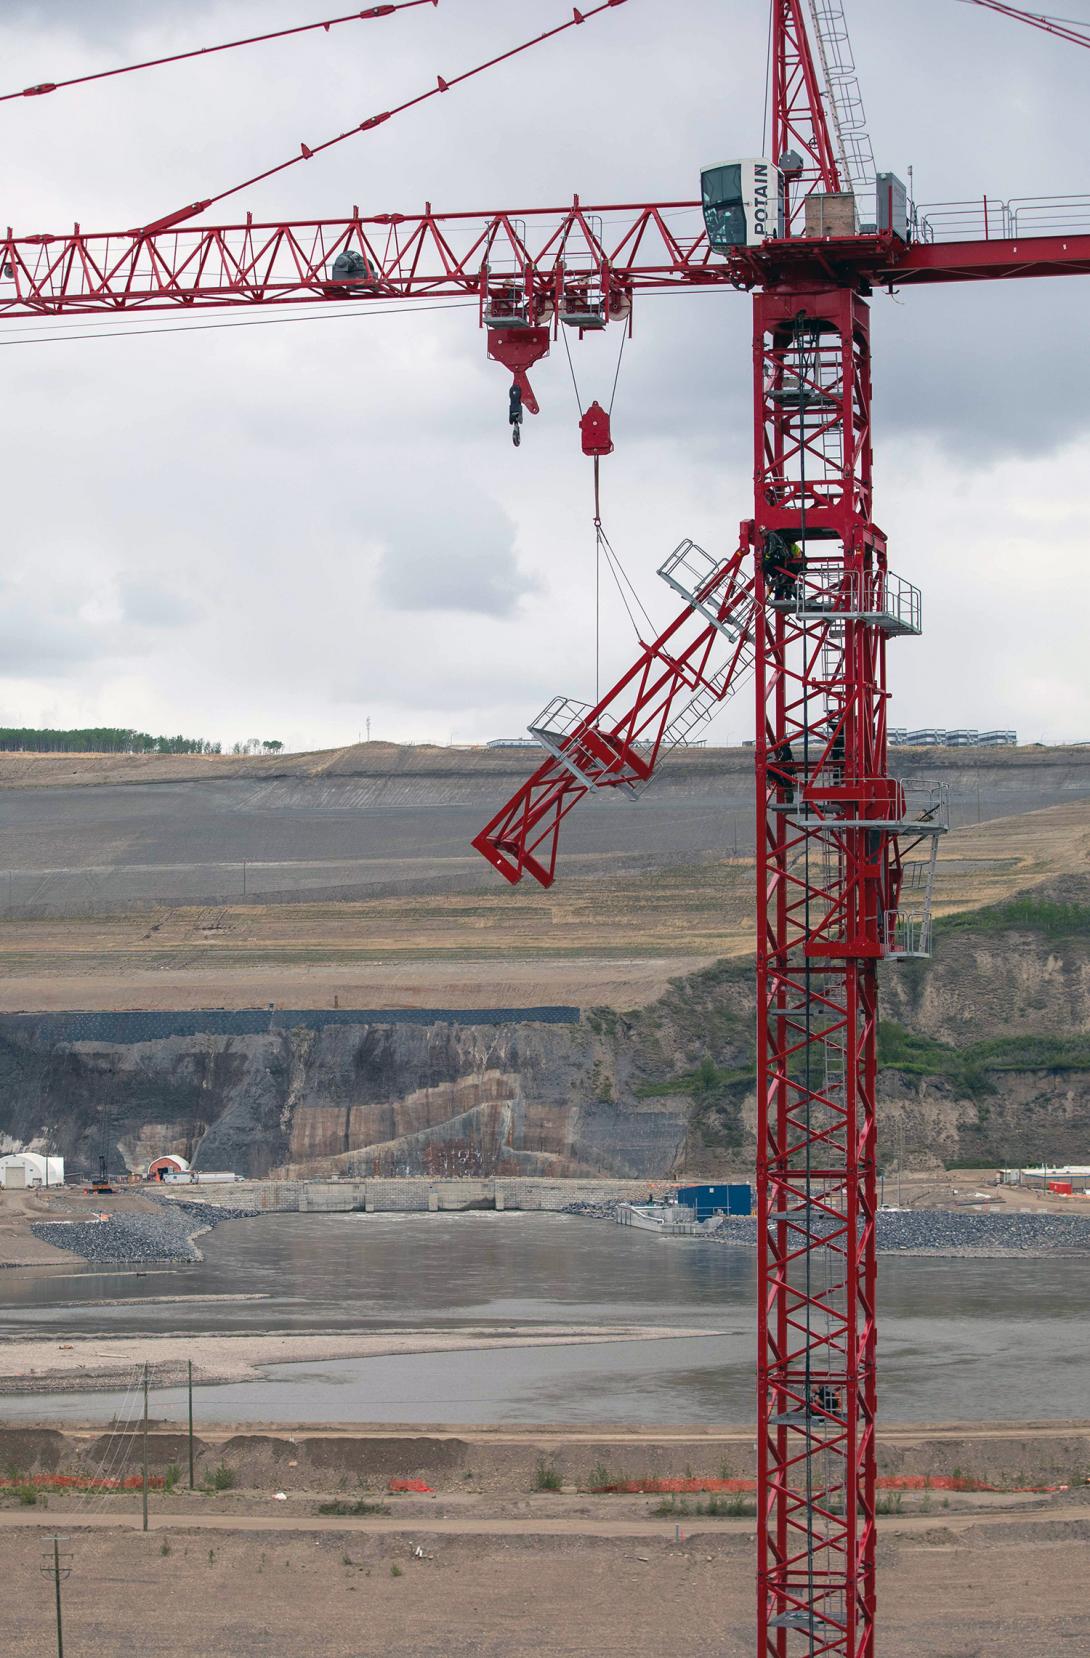 Dismantling the access assembly platforms on a newly erected tower crane at the spillway basin. | May 2021